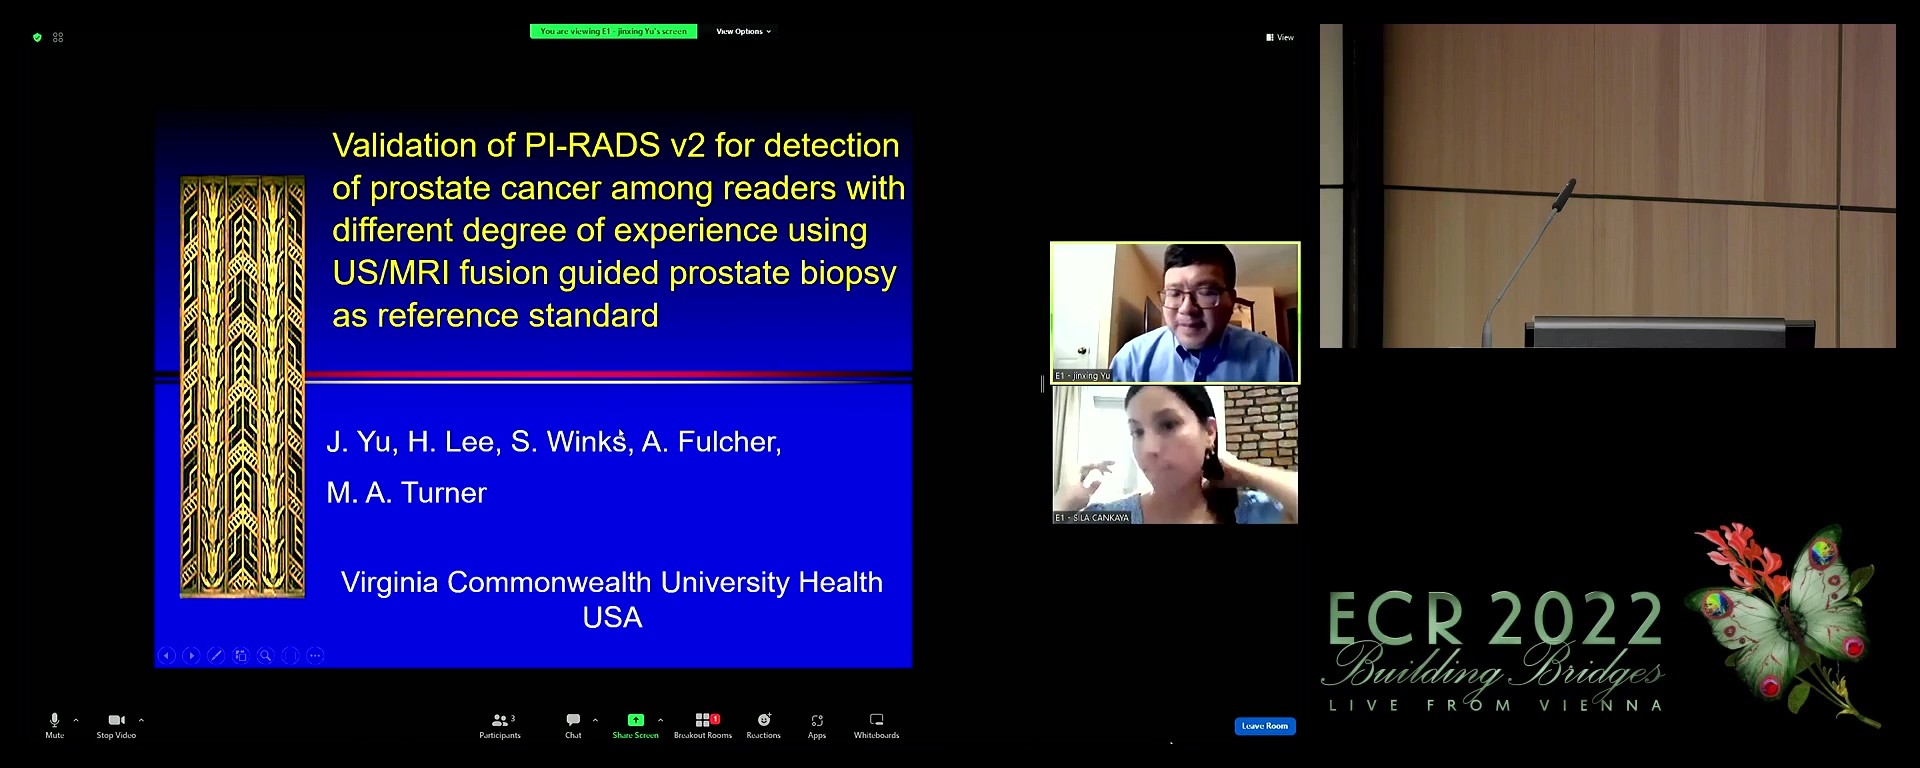 Validation of PI-RADS v2 for detection of prostate cancer among readers with different degree of experience using US/MRI fusion guided prostate biopsy as reference standard - Jinxing Yu, Richmond / US